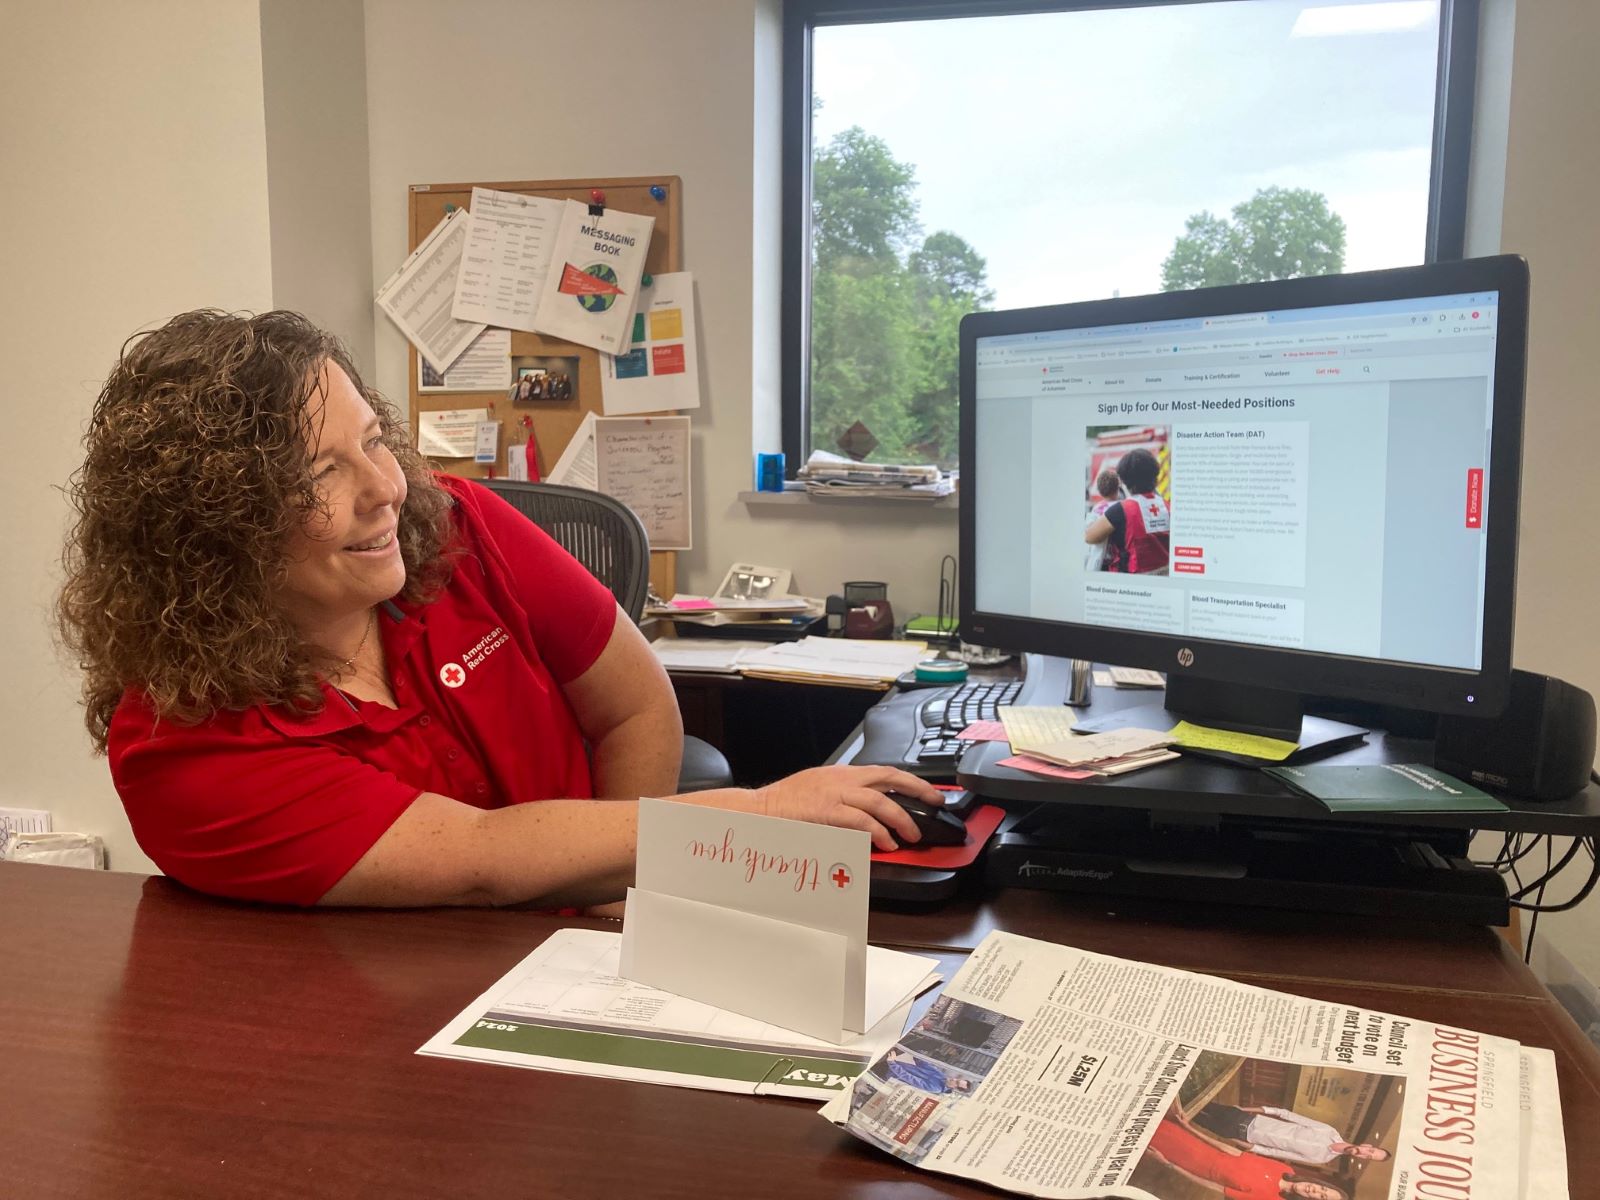 Red Cross Southern Missouri Chapter Executive Director Stacy Burks demonstrates how to find out about volunteer opportunities on the Red Cross website.